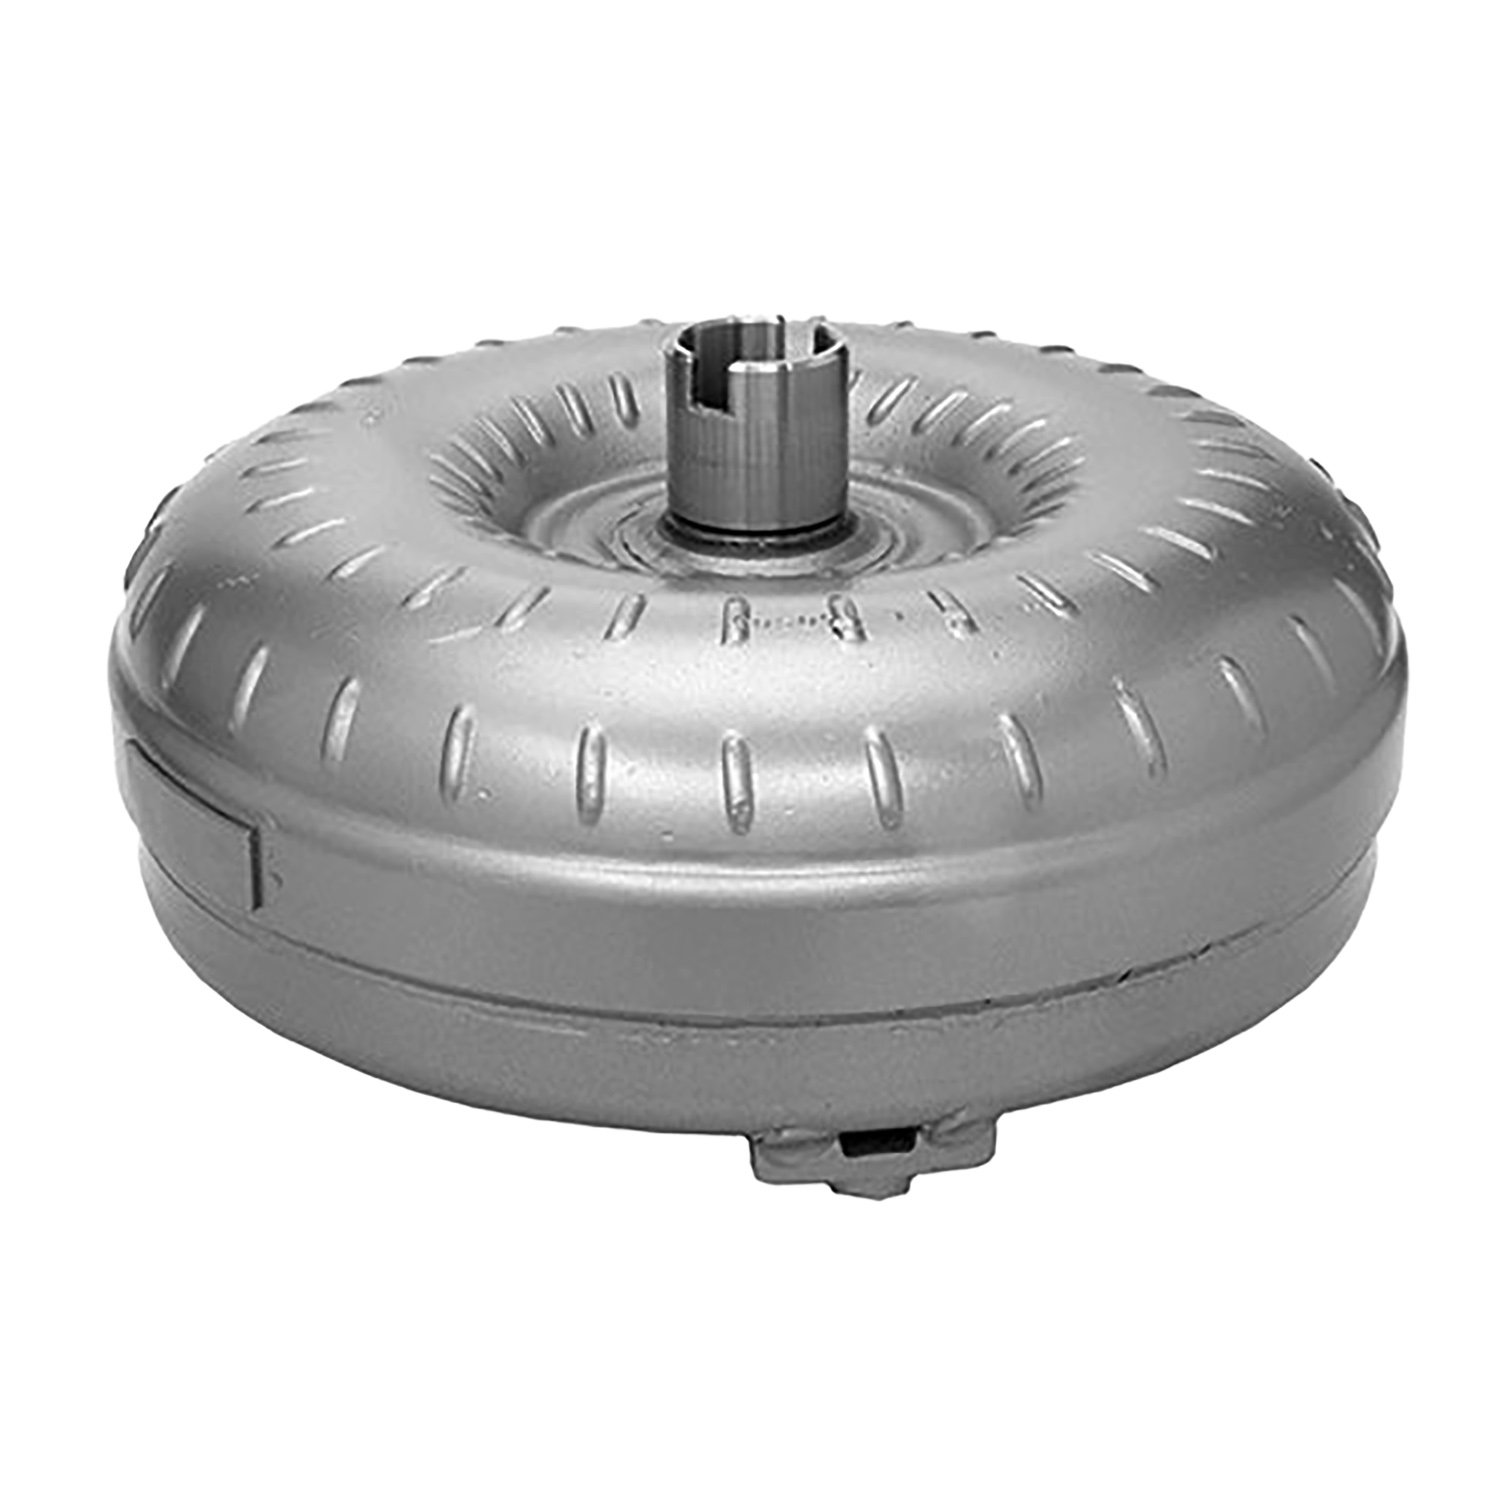 Remanufactured Automatic Transmission Torque Converter for GM TH700R4/4L60 87-95 LS